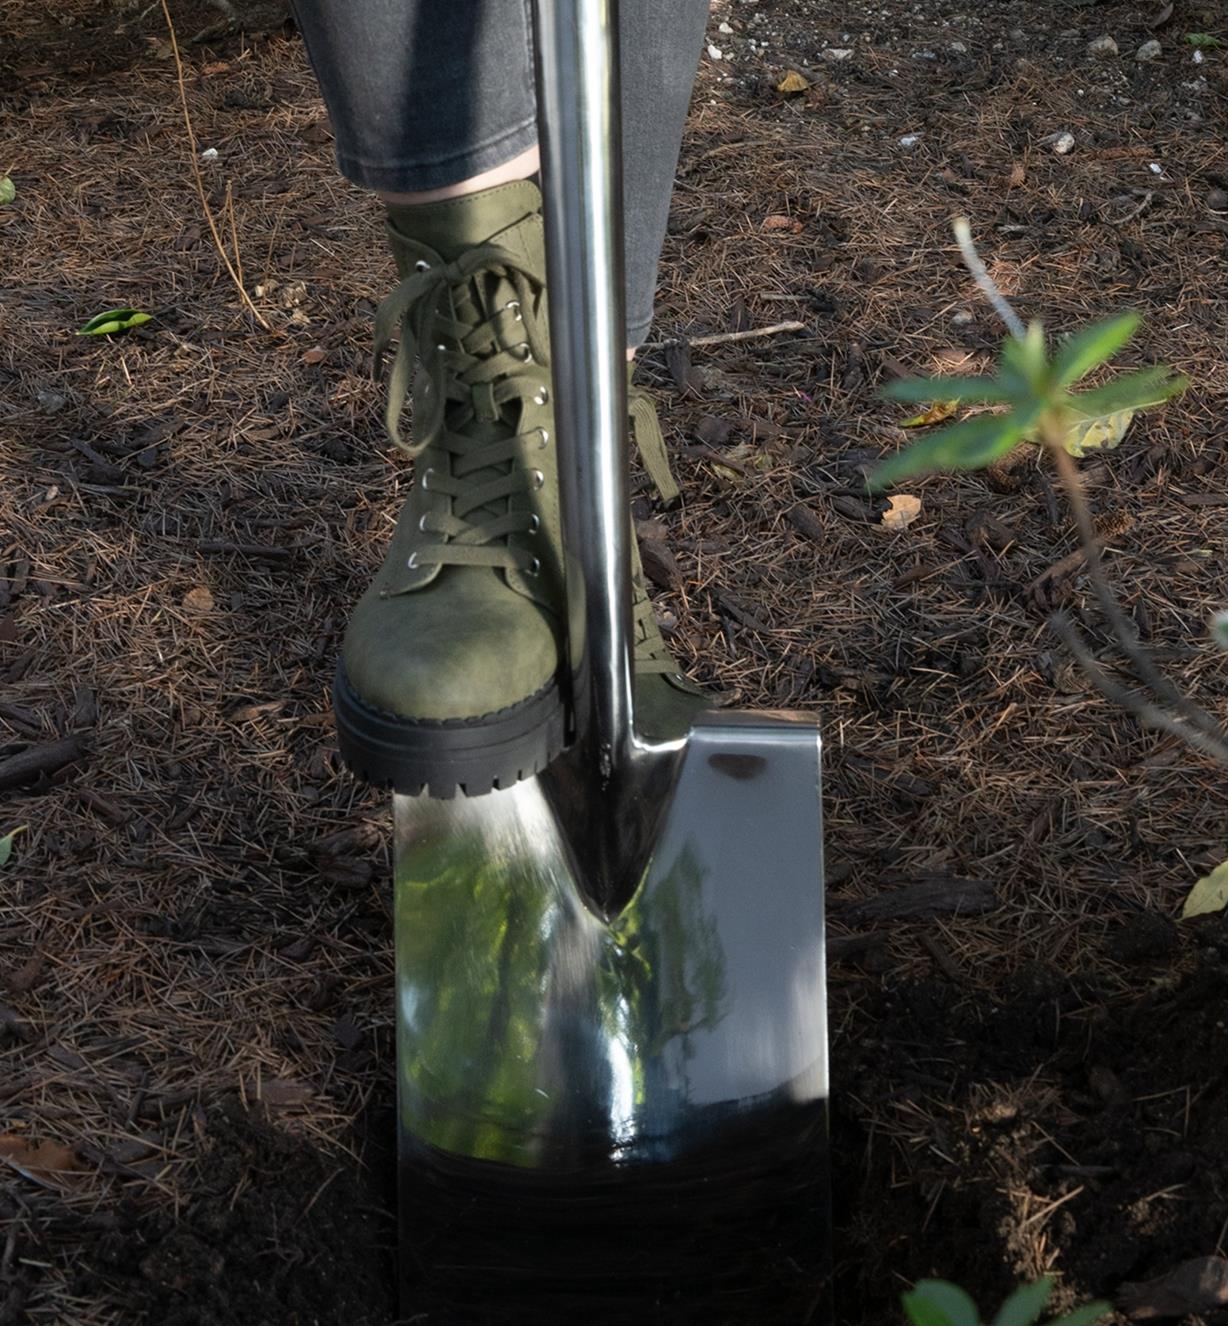 PA gardener uses the foot tread to push the digging spade into the ground